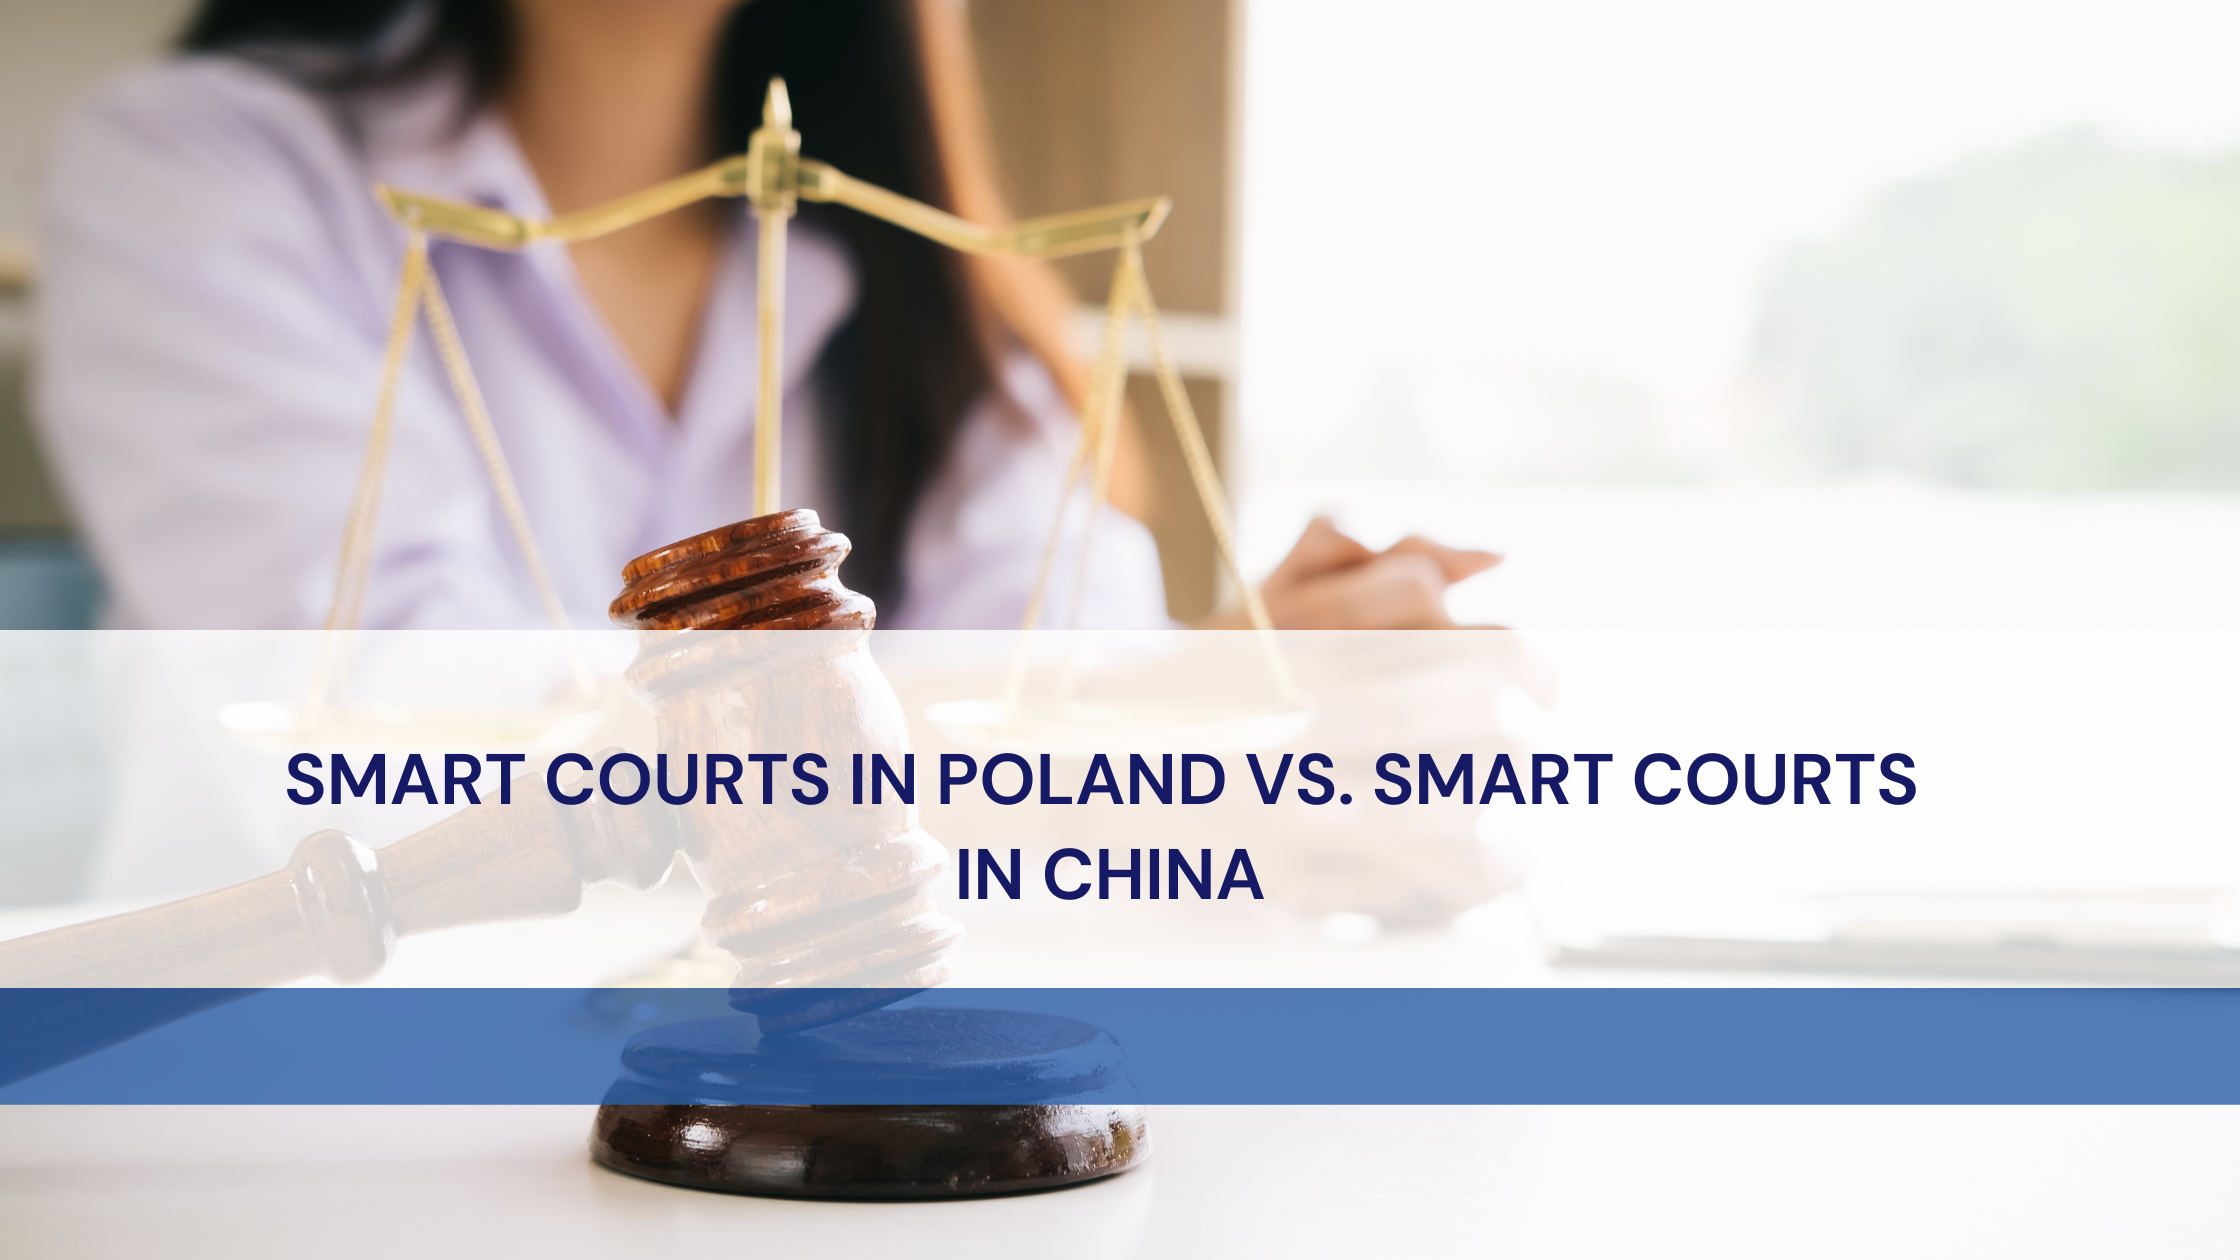 Smart Courts in Poland vs. Smart Courts in China